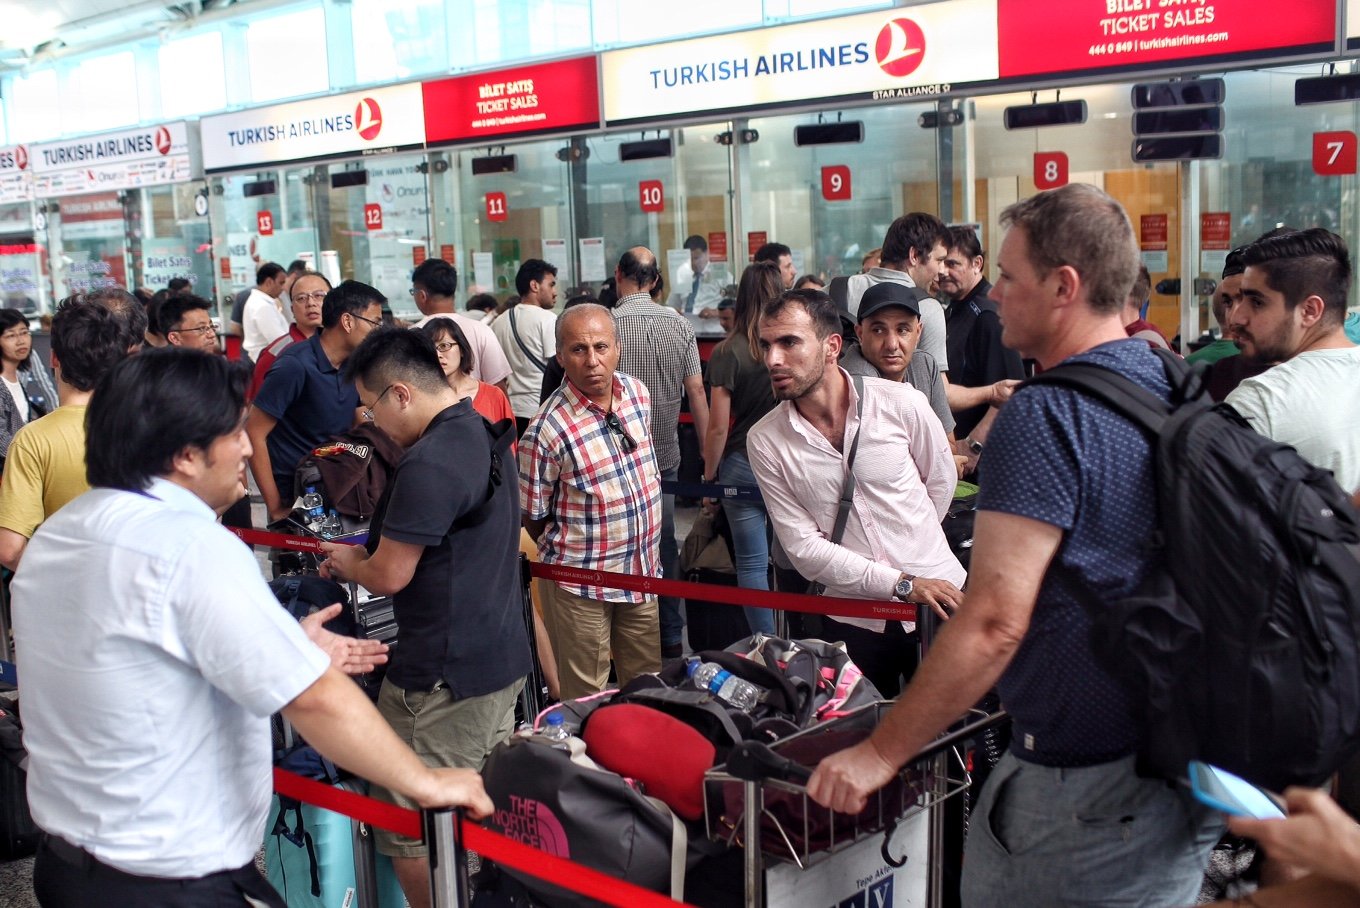 International passengers wait for flight information after flights to Ataturk Airport were delayed or cancelled on July 17, 2016 in Istanbul. (Kursat Bayhan—Getty Images)